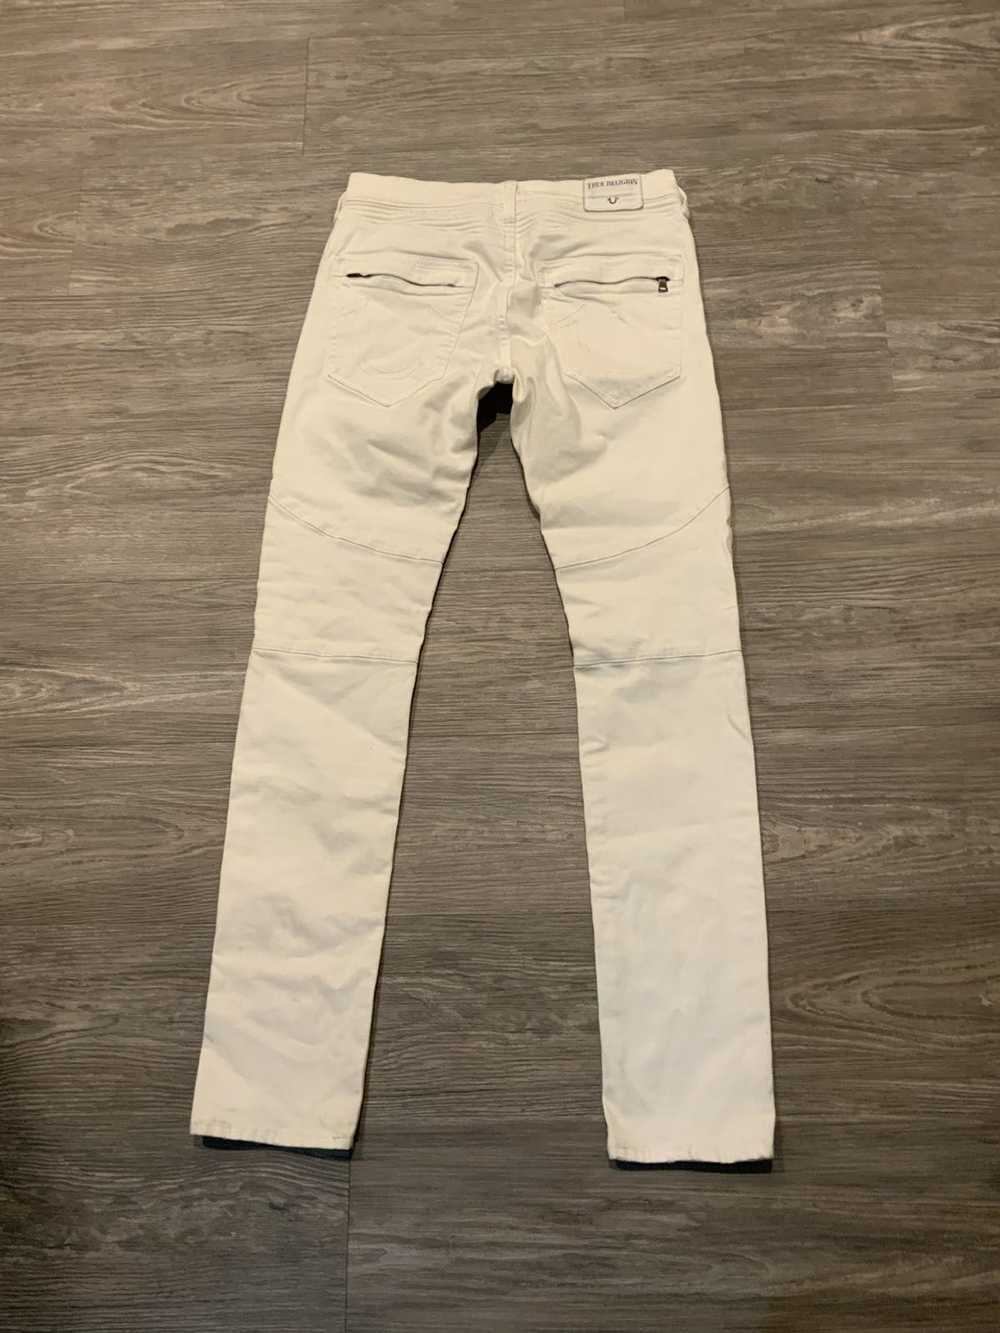 True Religion Sold Out $300 Rocco Distressed Moto… - image 4